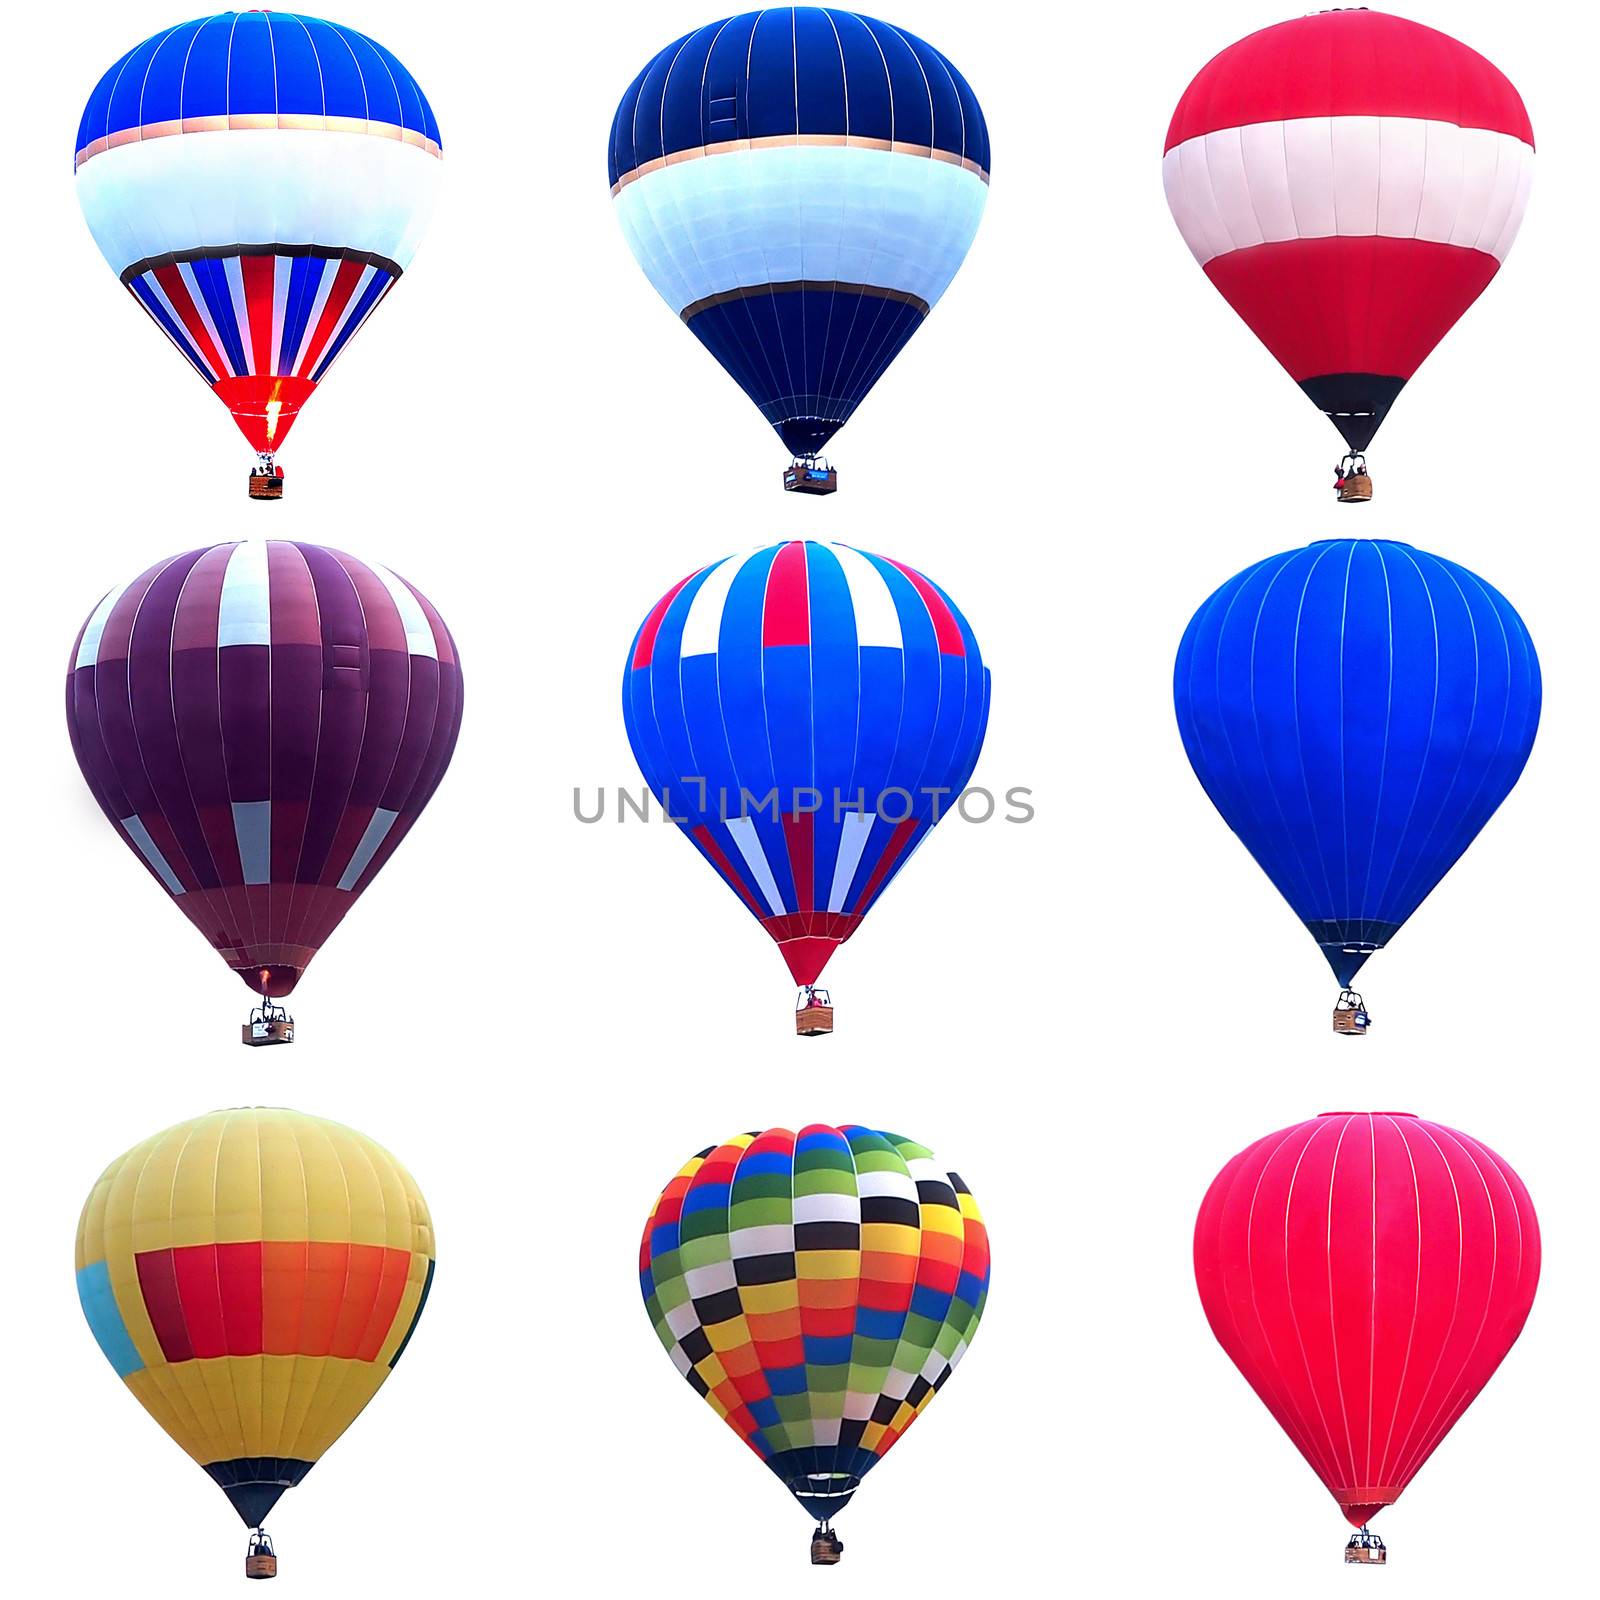 Collage of multicolored hot air balloons